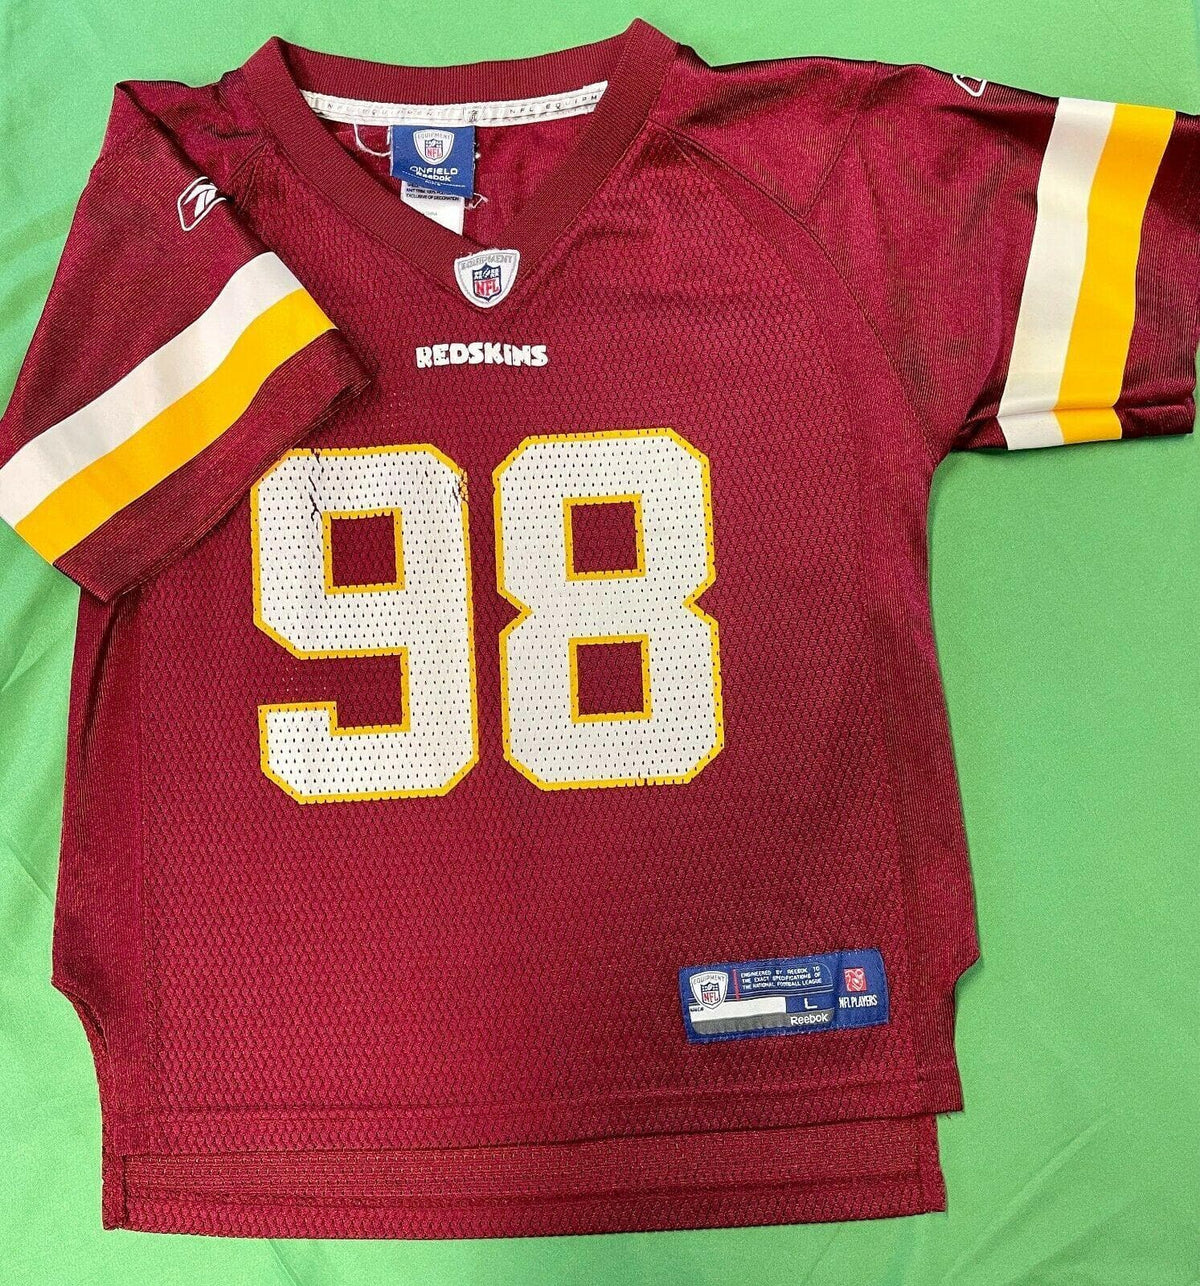 NFL Washington Commanders (Redskins) Orakpo #98 Jersey Youth Small 7